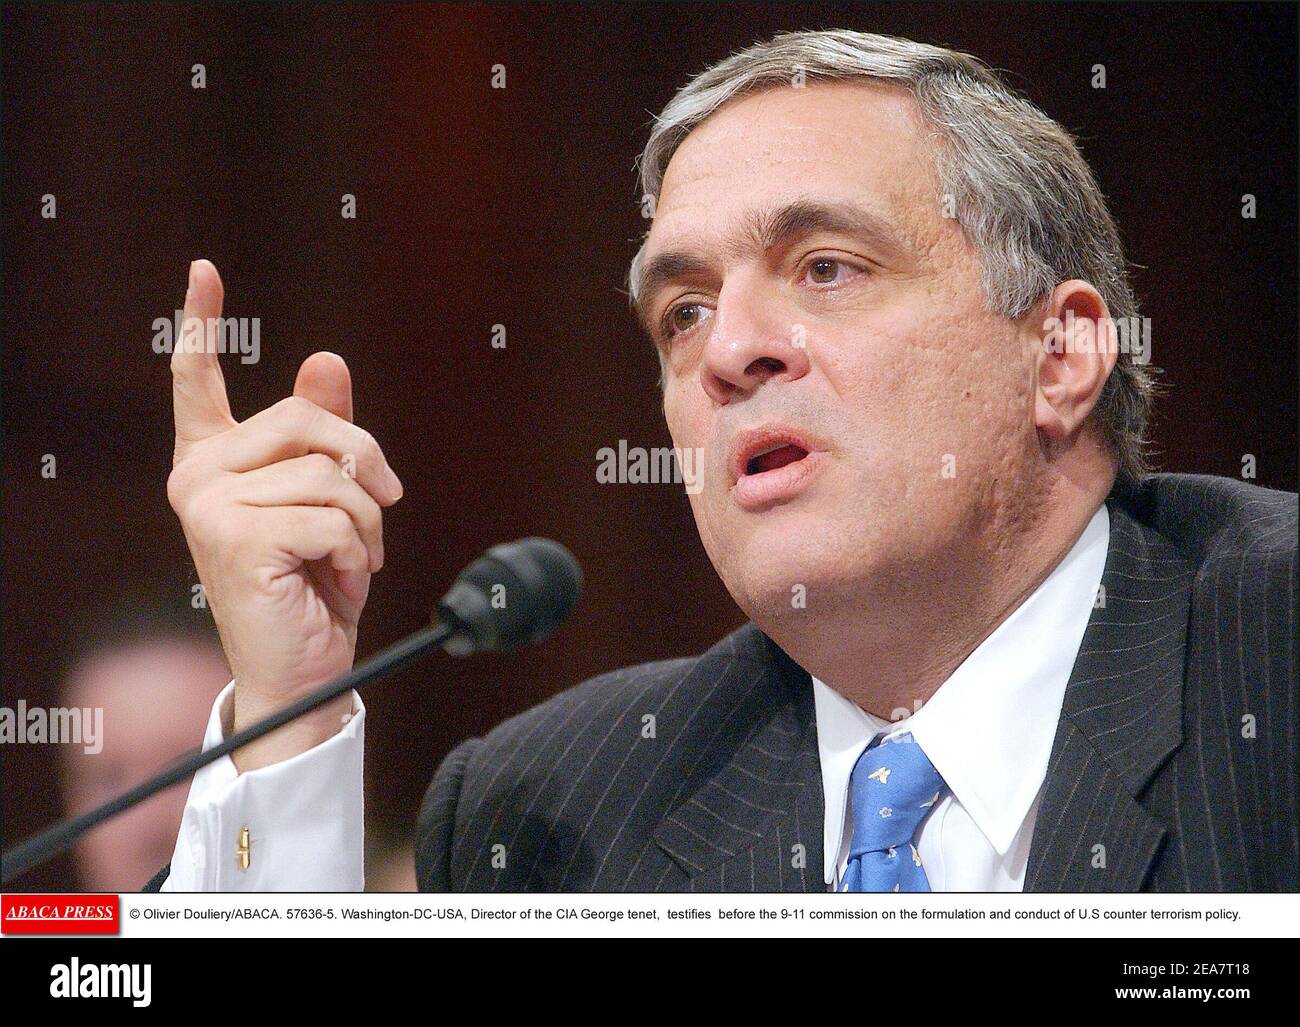 © Olivier Douliery/ABACA. 57636-5. Washington-DC-USA, March 24, 2004. Director of the CIA George tenet, testifies before the 9-11 commission on the formulation and conduct of U.S counter terrorism policy, March 24, 2004, in Washington DC. Stock Photo